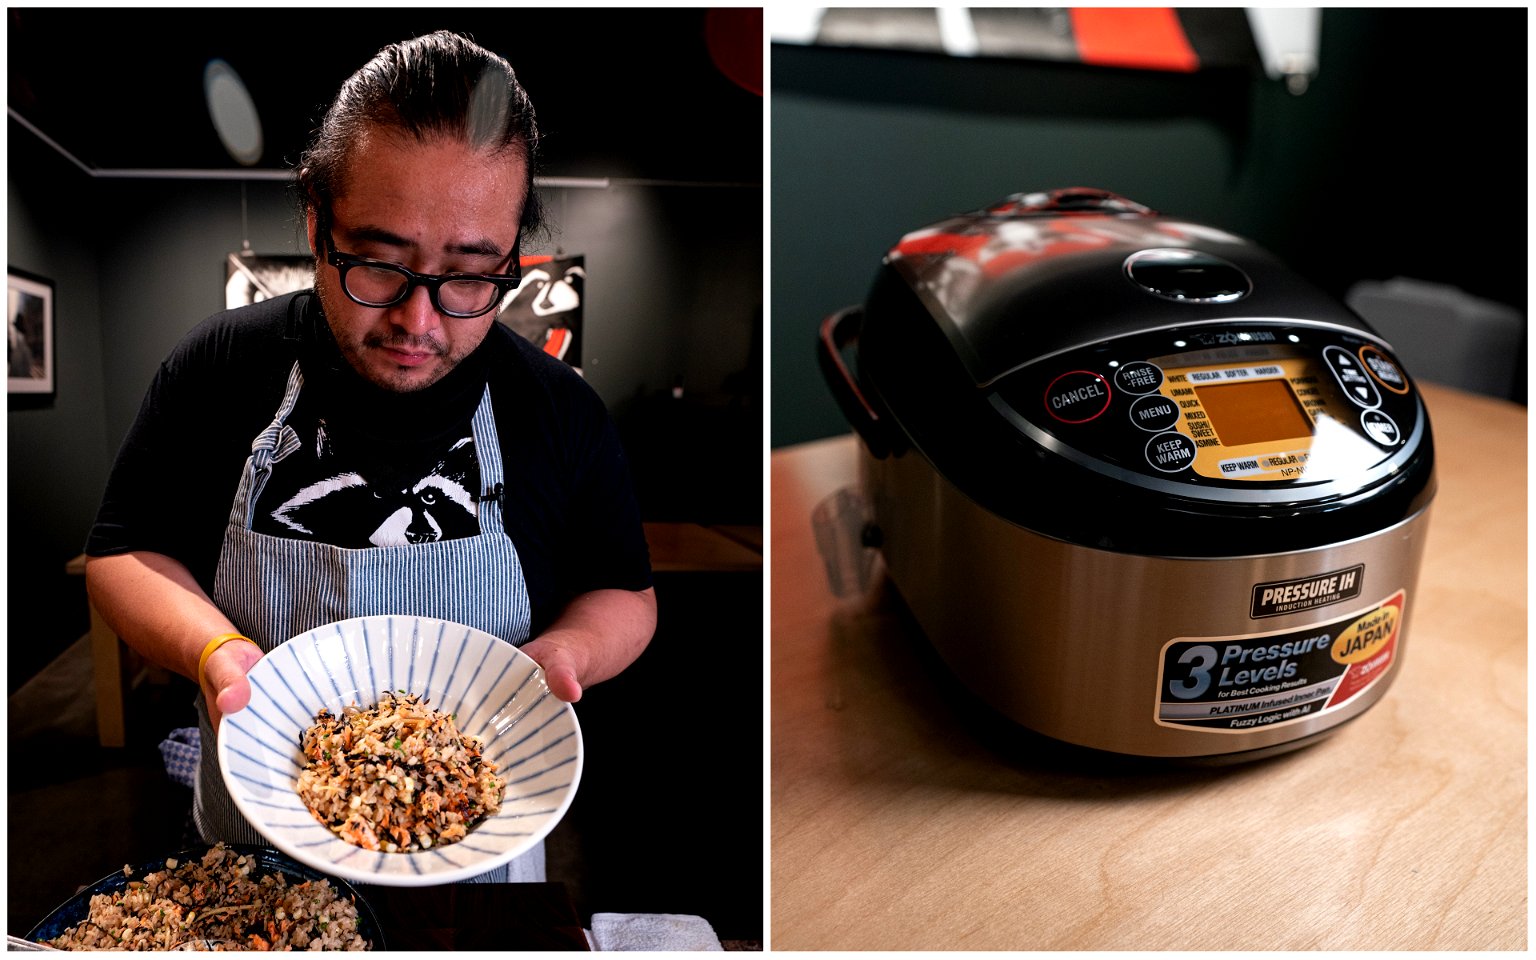 Watch a Michelin Star Chef Make a Japanese Staple Dish Almost Entirely in a Rice Cooker